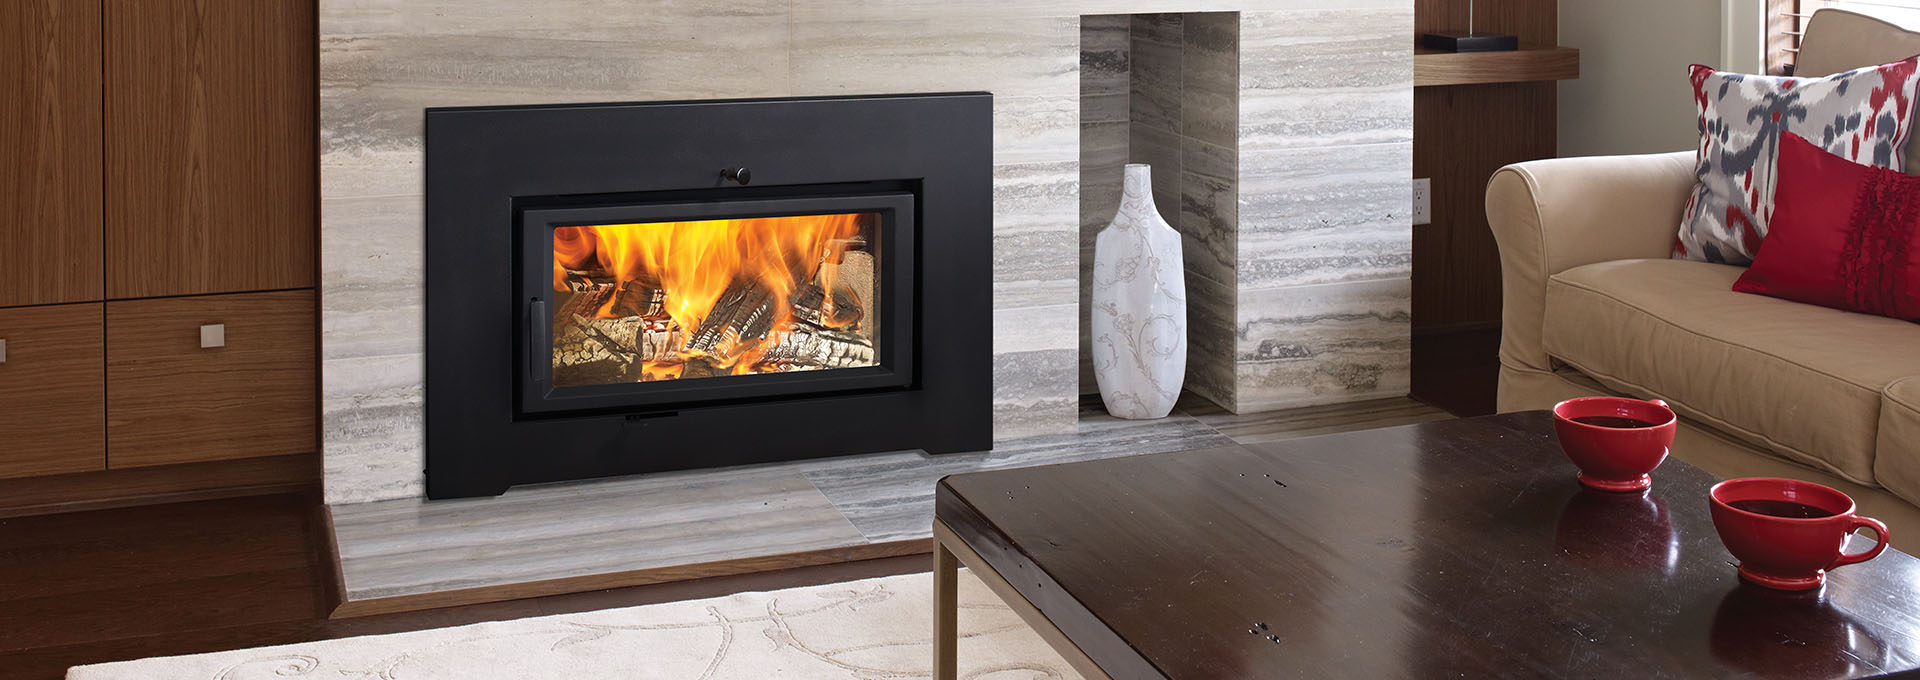 Install Wood Stove In Fireplace Lovely Wood Inserts Epa Certified